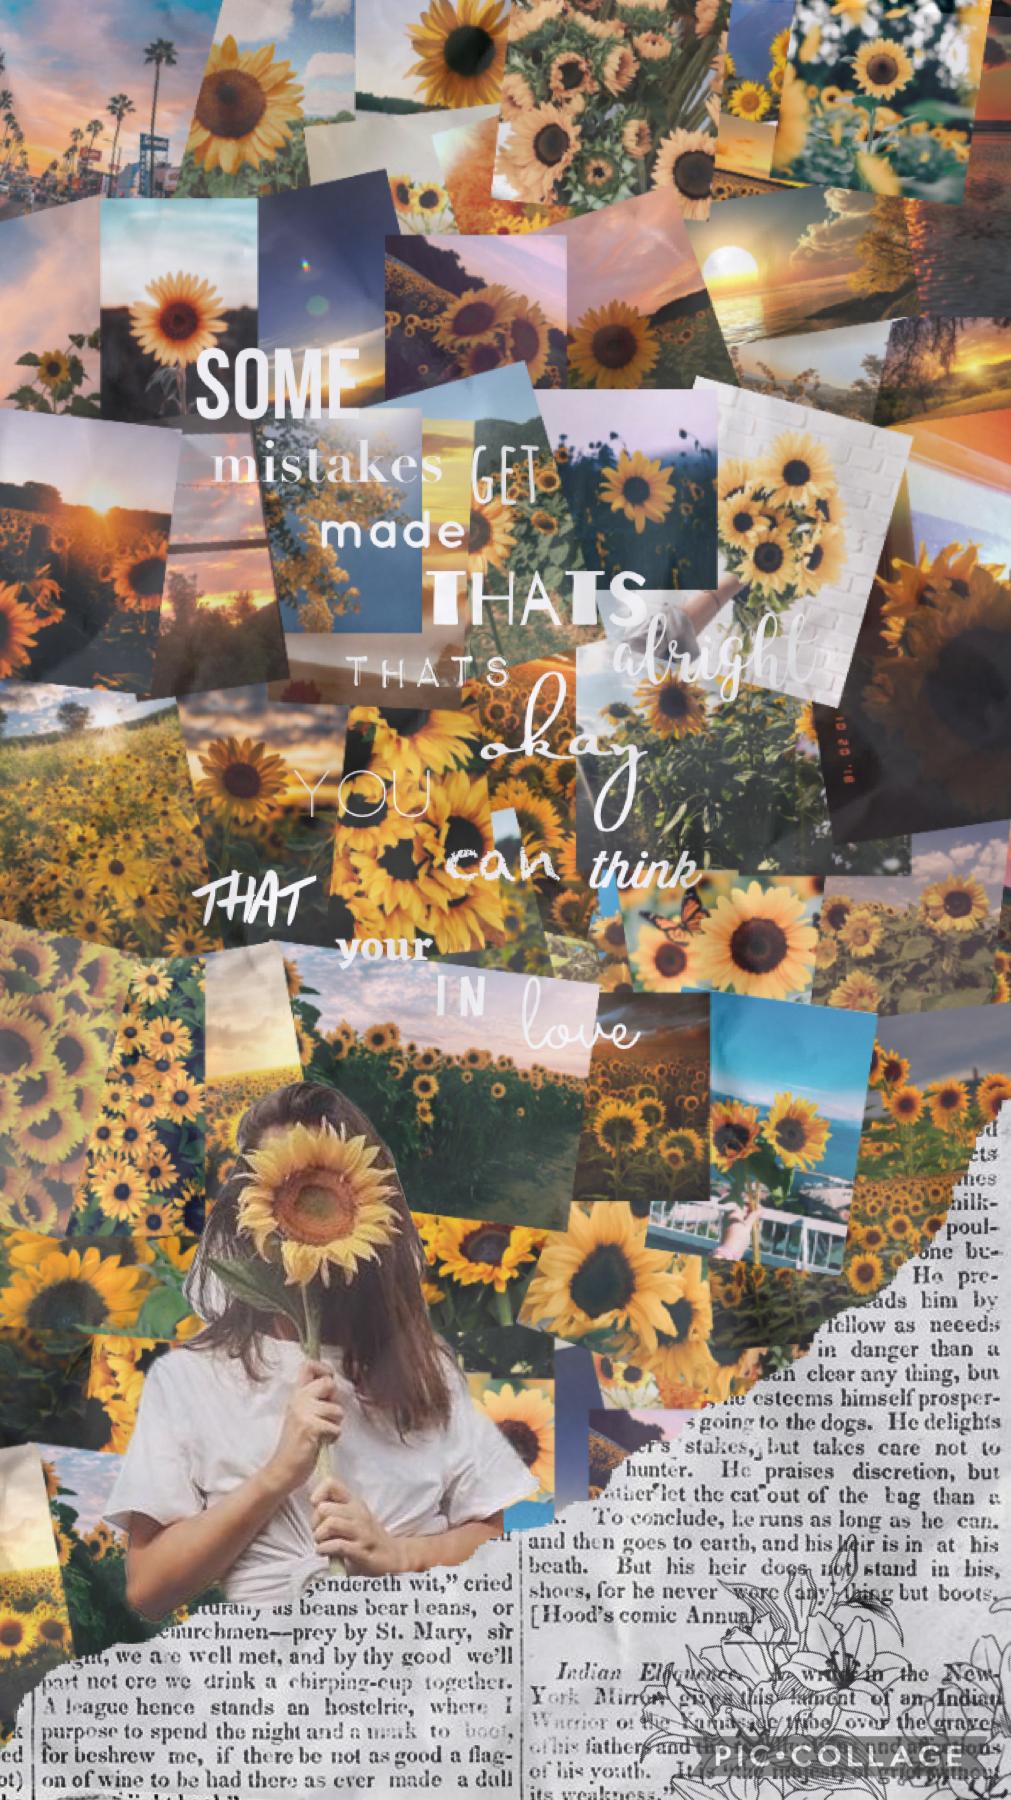 🌻tap🌻
Hello sunshiners 💛
This is my first post so please be nice. 
Hope your having a lovely day, and I will see y’all soon 
xox sunshine-daydreams 